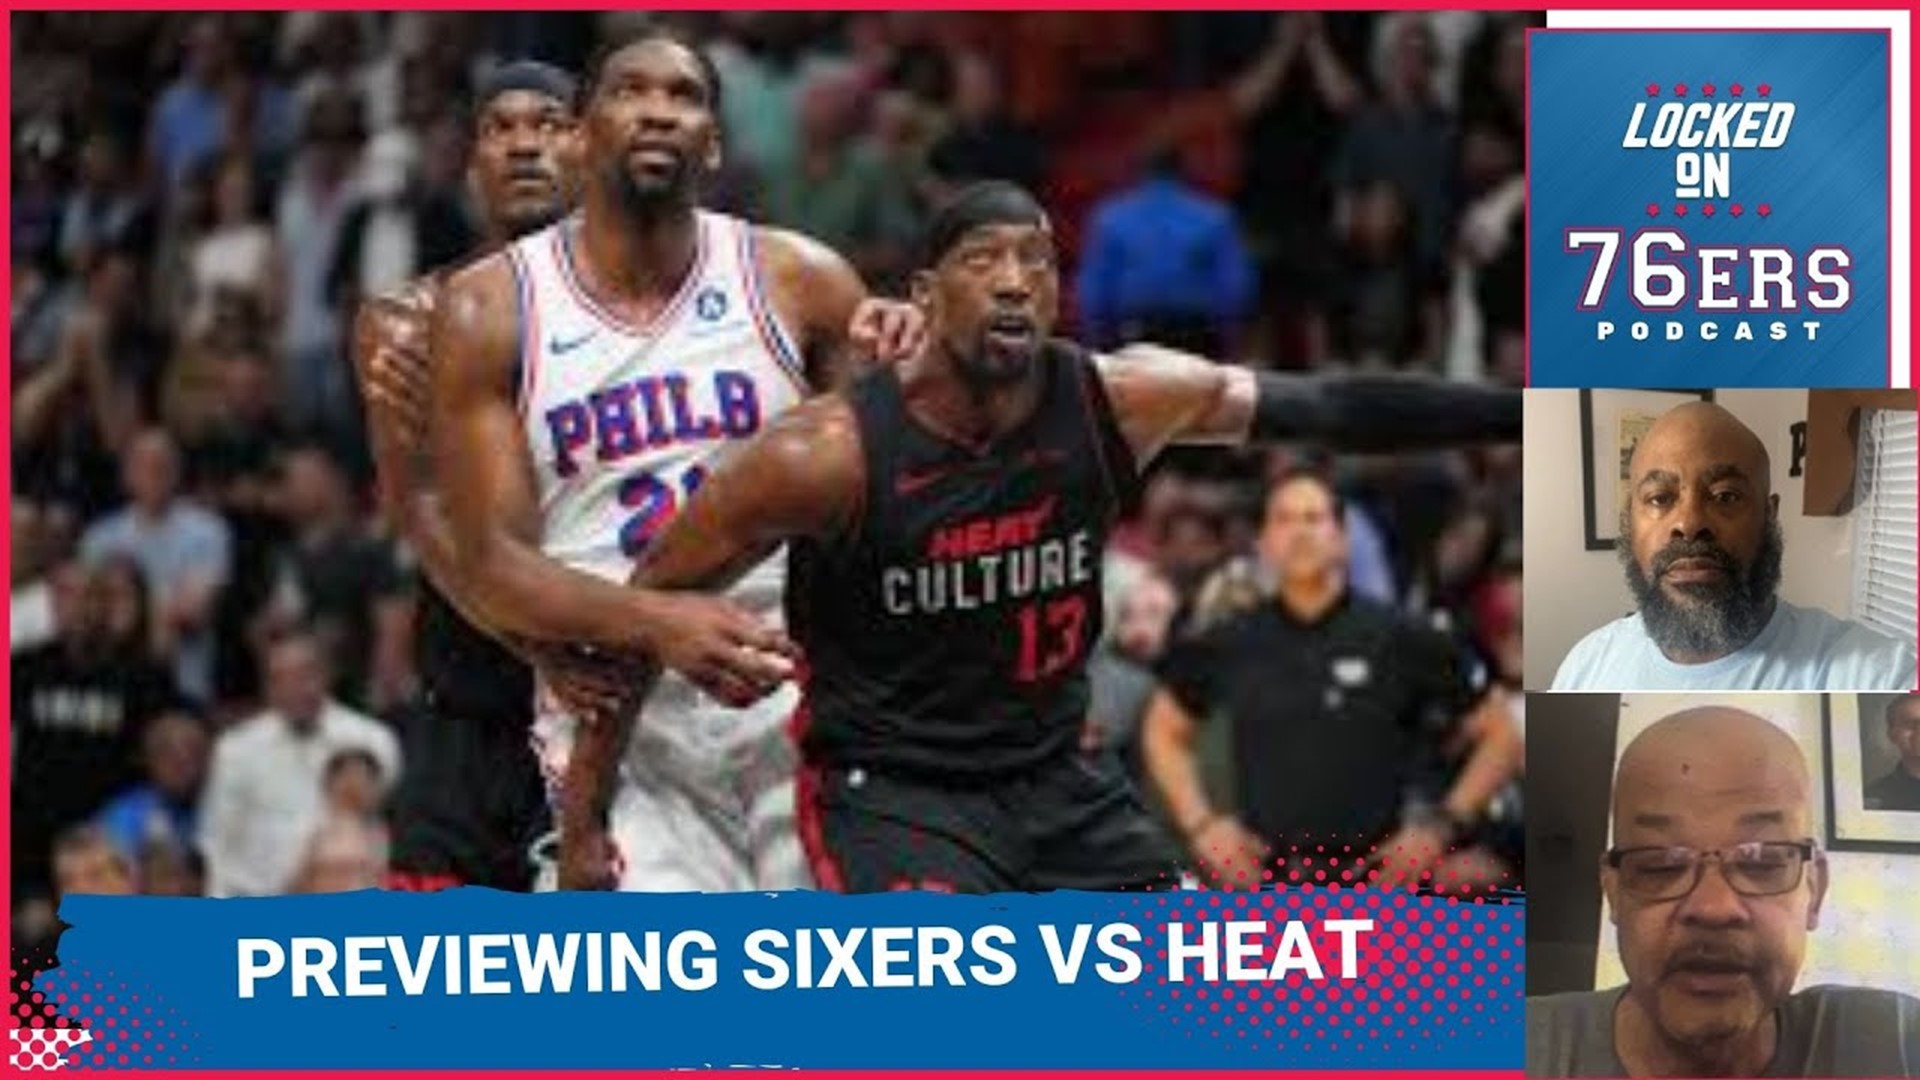 Previewing Sixers' matchup with Heat in NBA Play-In Tournament, and talking about A.I.'s sculpture